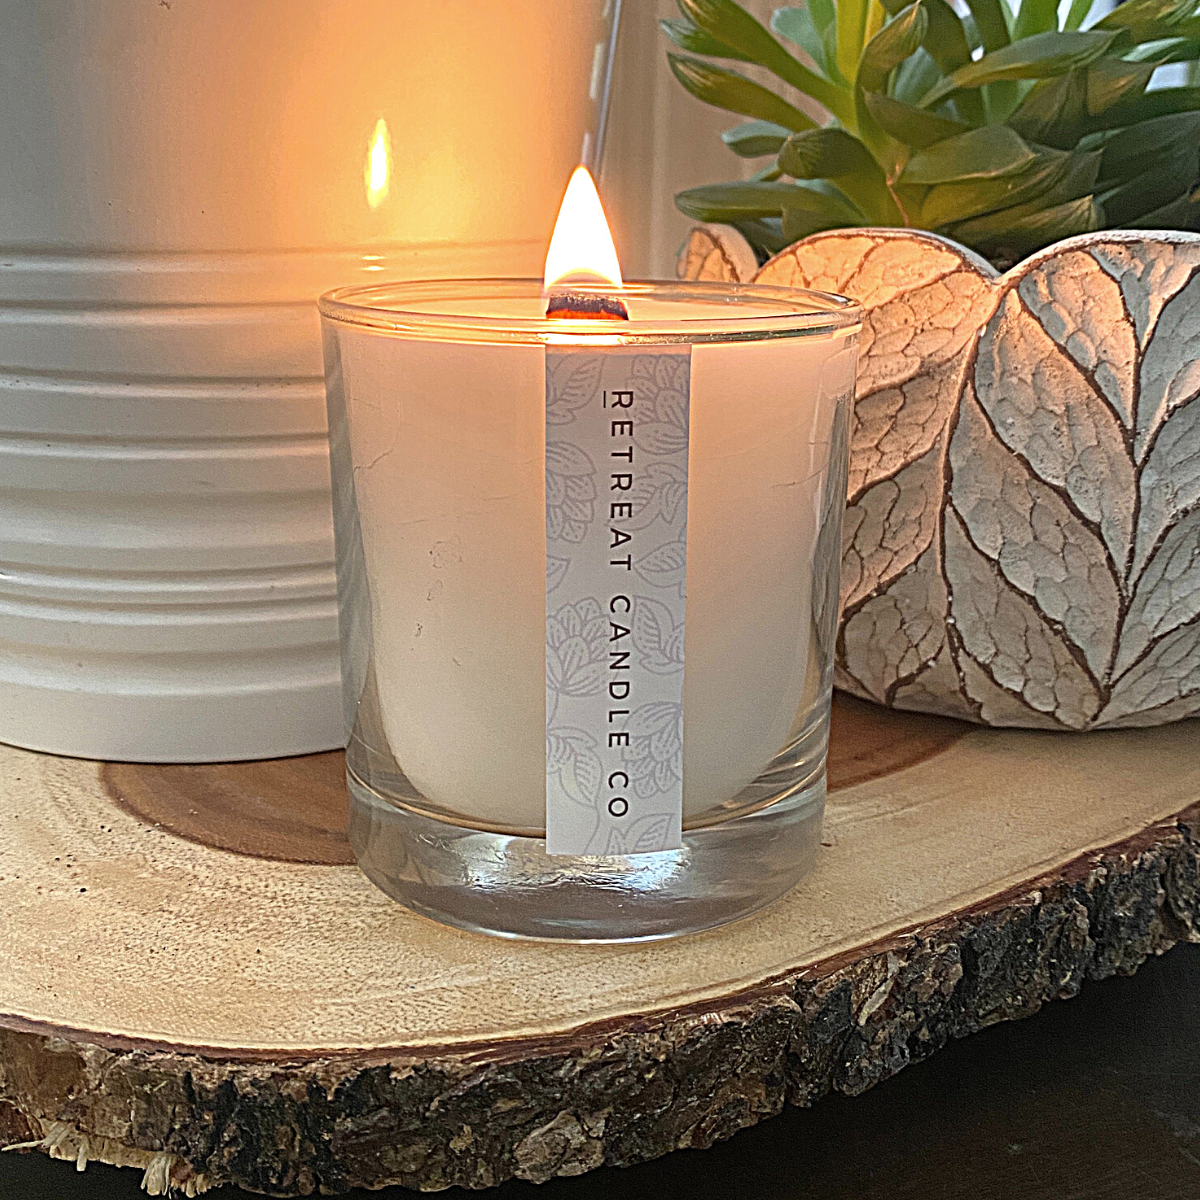 Evergreen Candle - #CandlesForACause - Partial proceeds of this candle gives back to kids mental health. Vegan. All-natural soy and coconut wax. Phthalate-free fragrances. Crackling wooden wick, and a seed paper bookmark to plant in your candle jar after. Feel good about what you buy. 